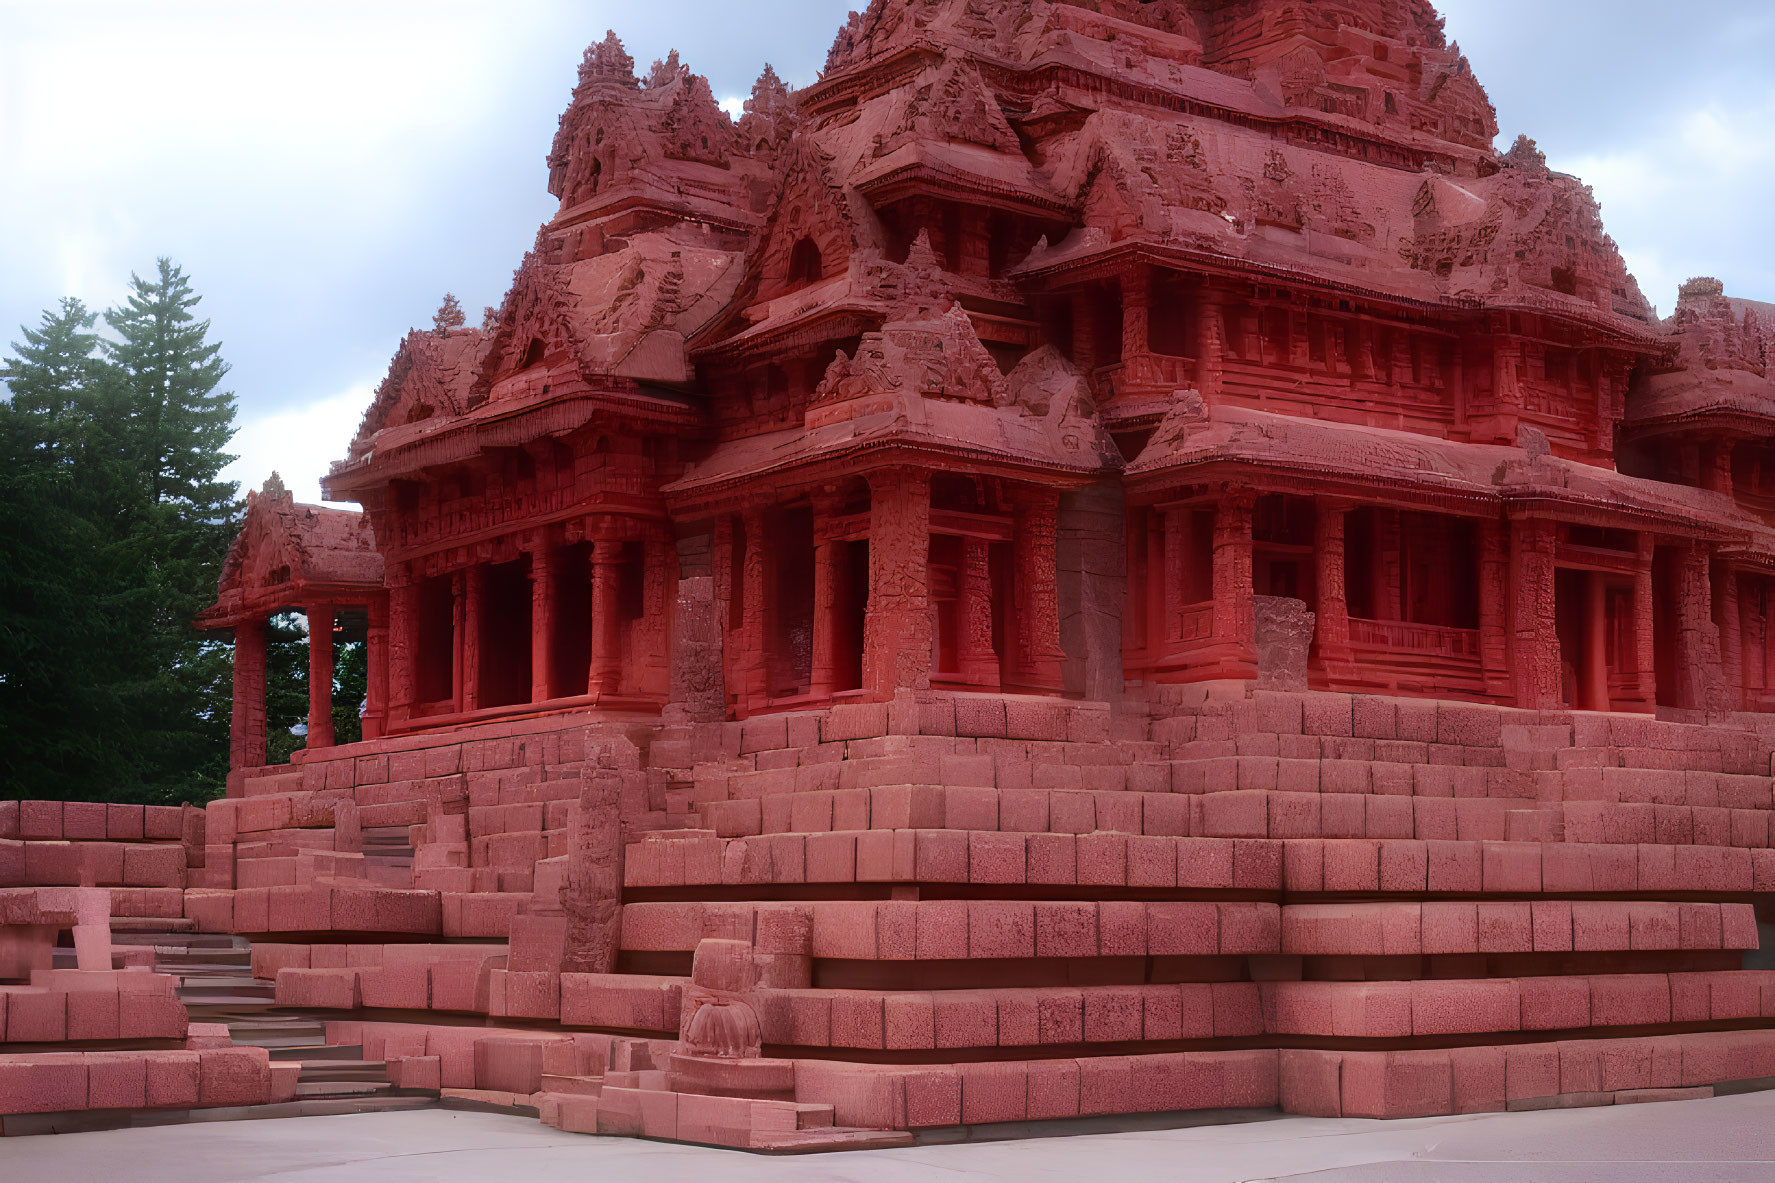 Intricately Carved Red Sandstone Temple with Ornate Detailing